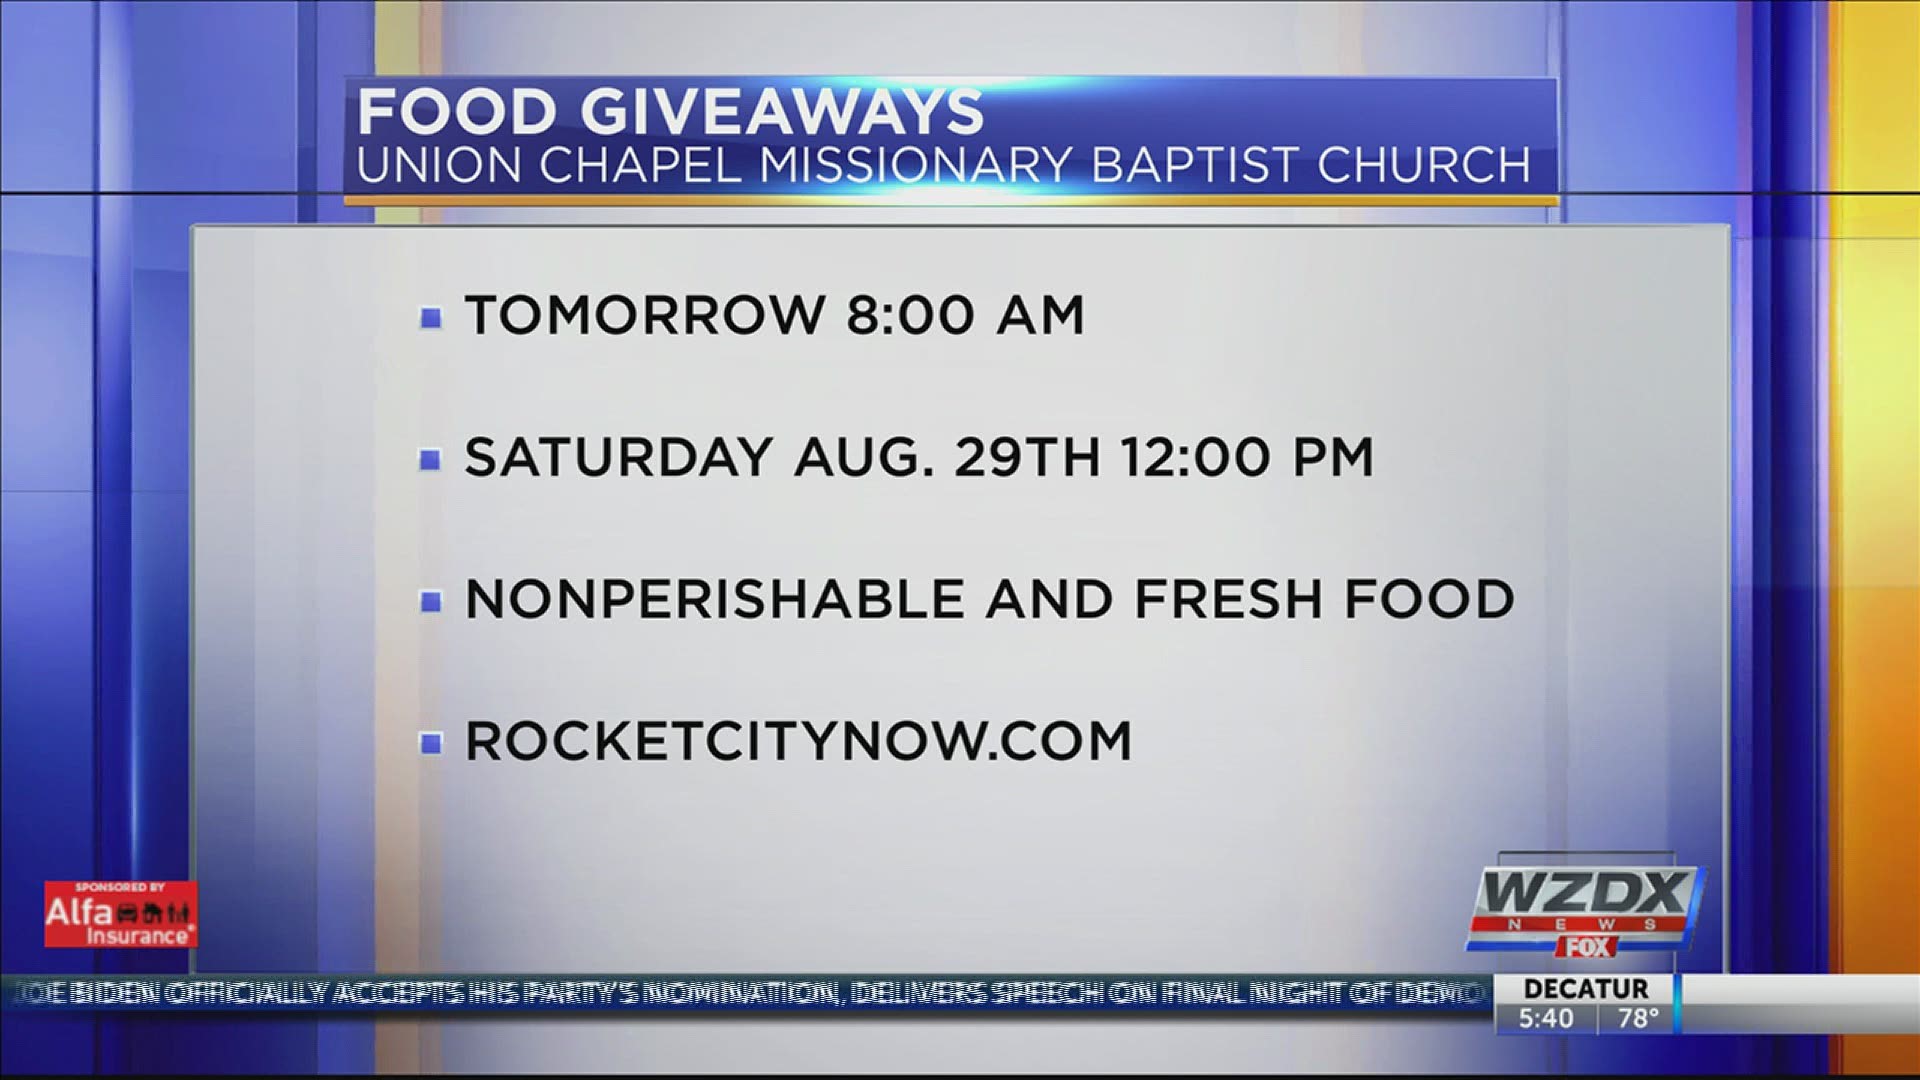 Union Chapel Missionary Baptist Church is hosting two food giveaways.